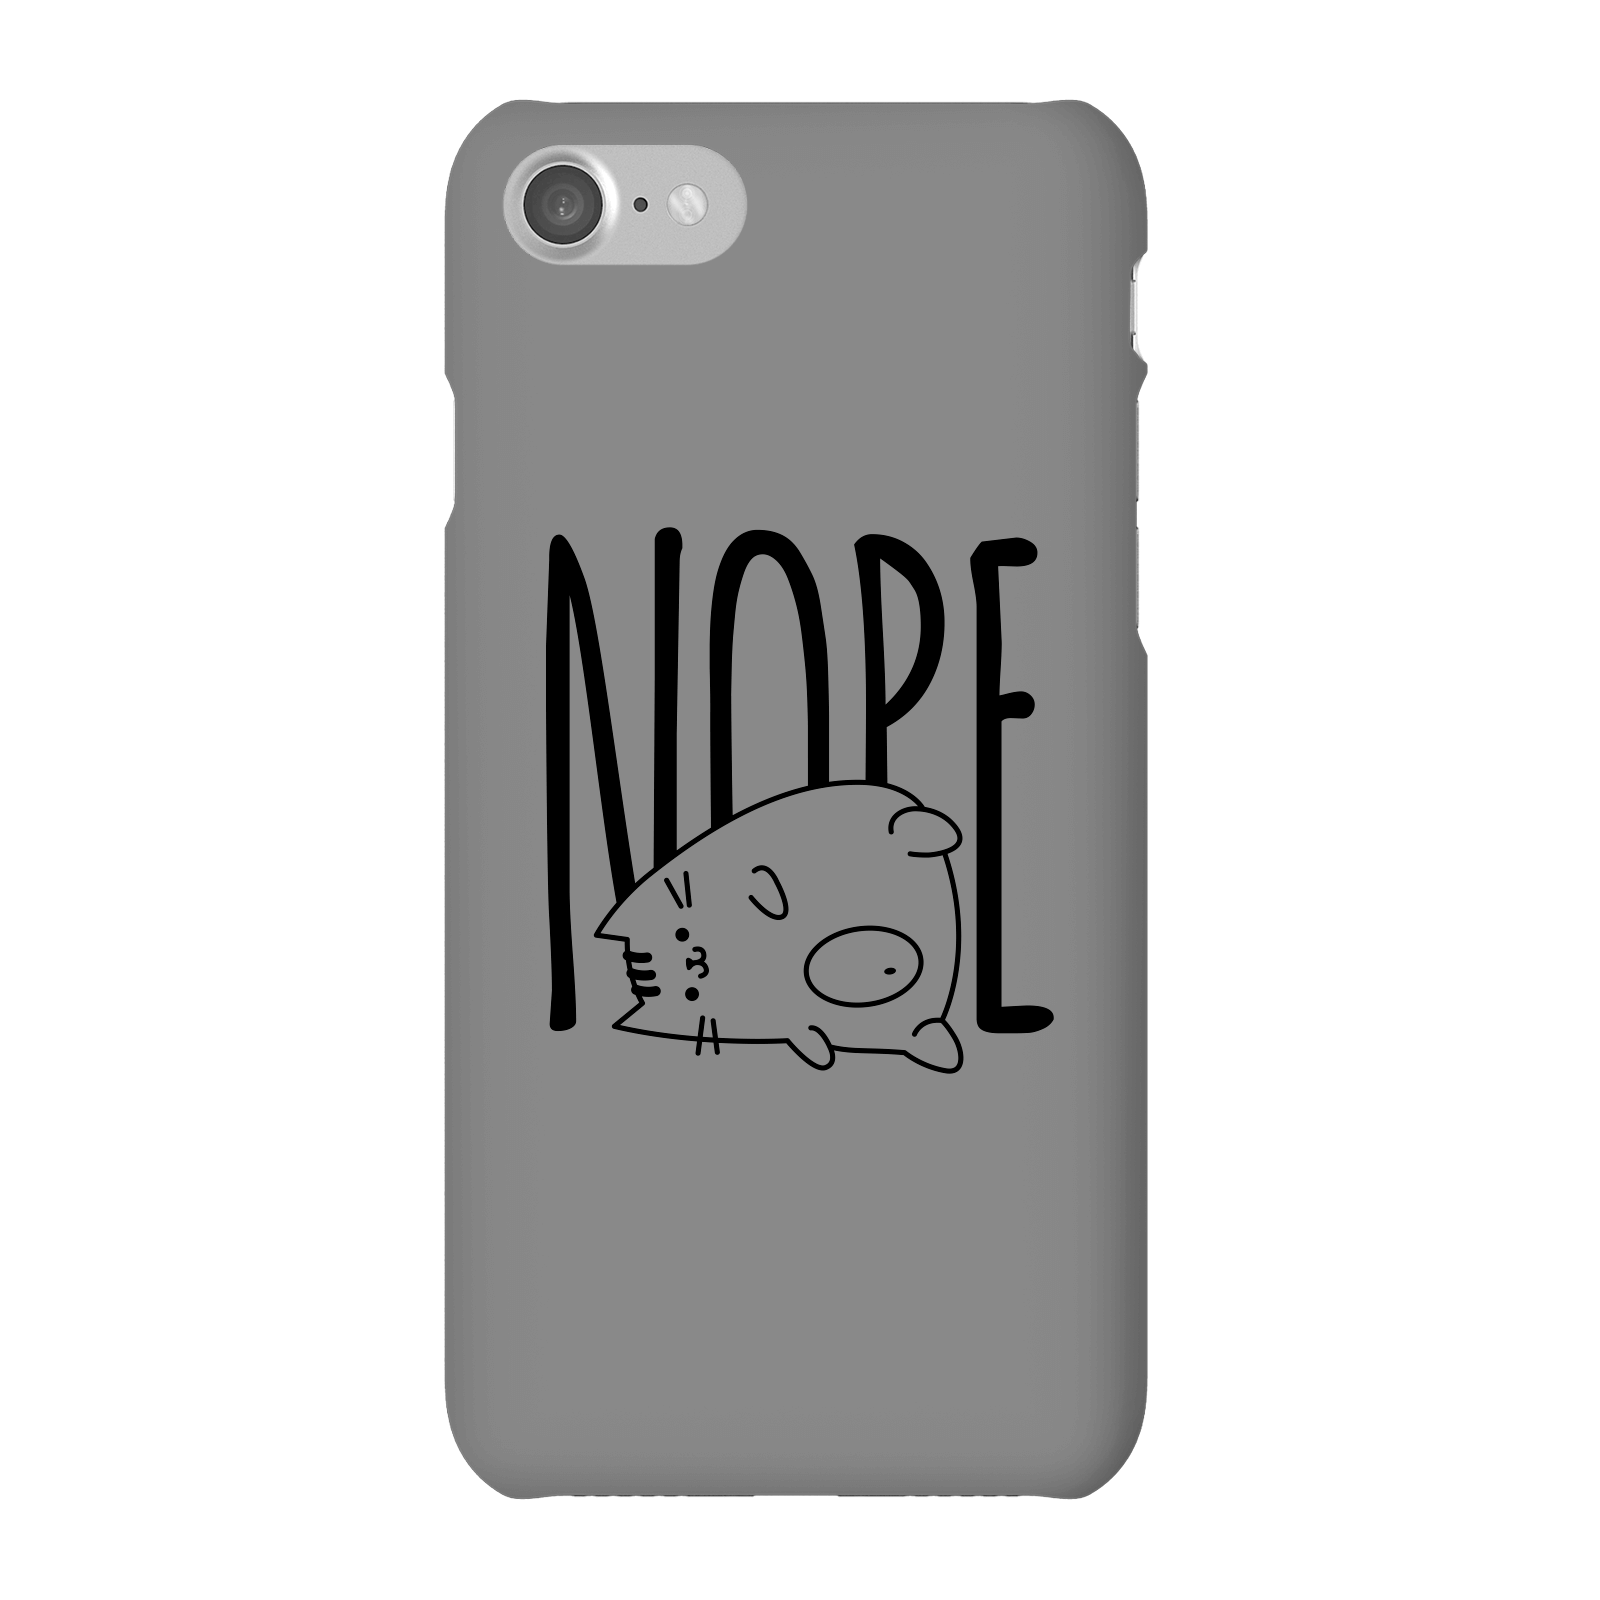 Nope Phone Case for iPhone and Android - iPhone 7 - Snap Case - Matte